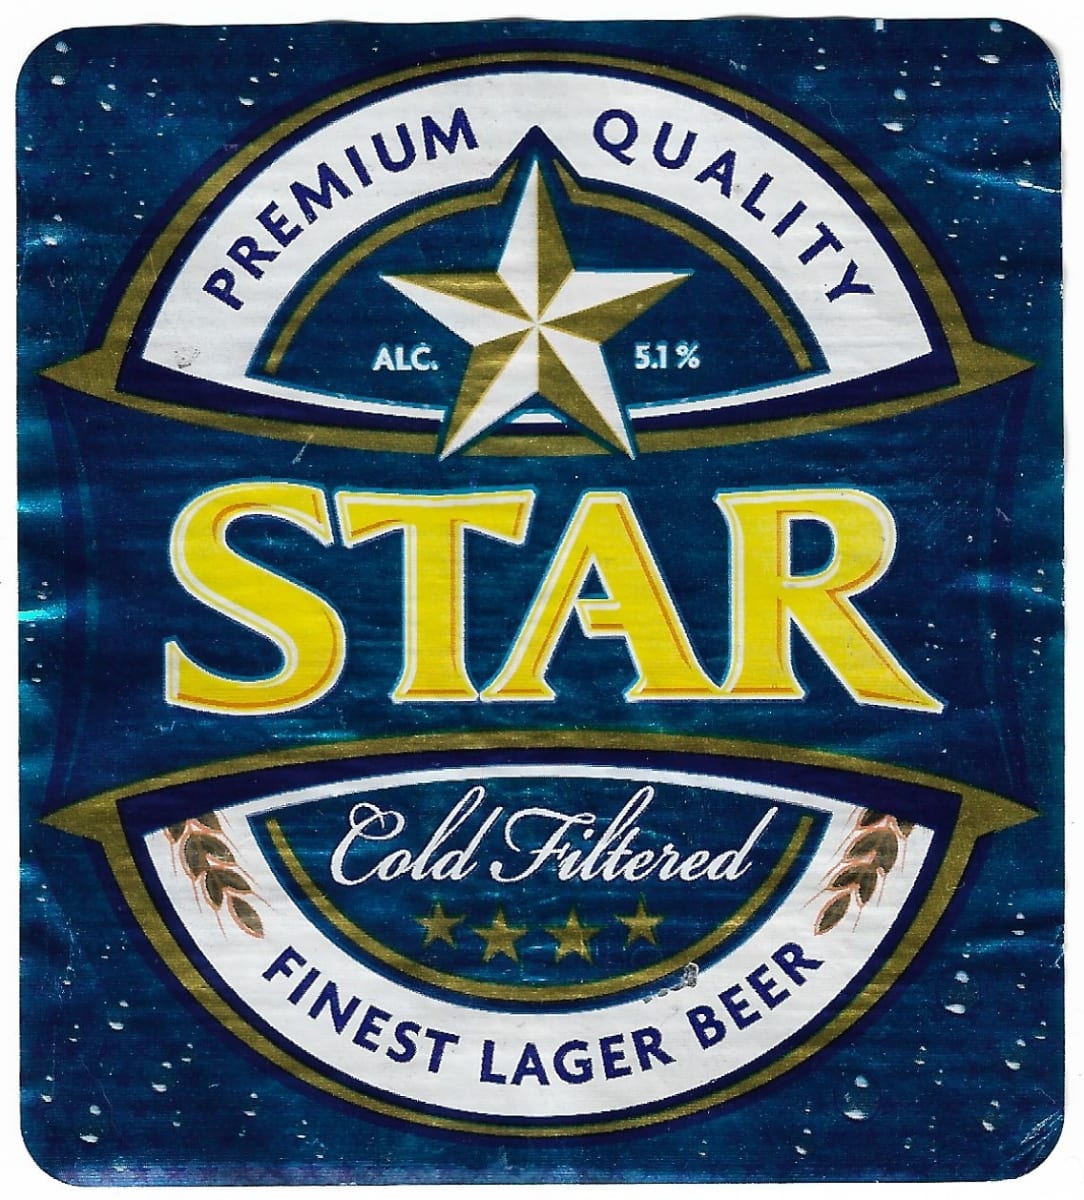 Star Cold Filtered